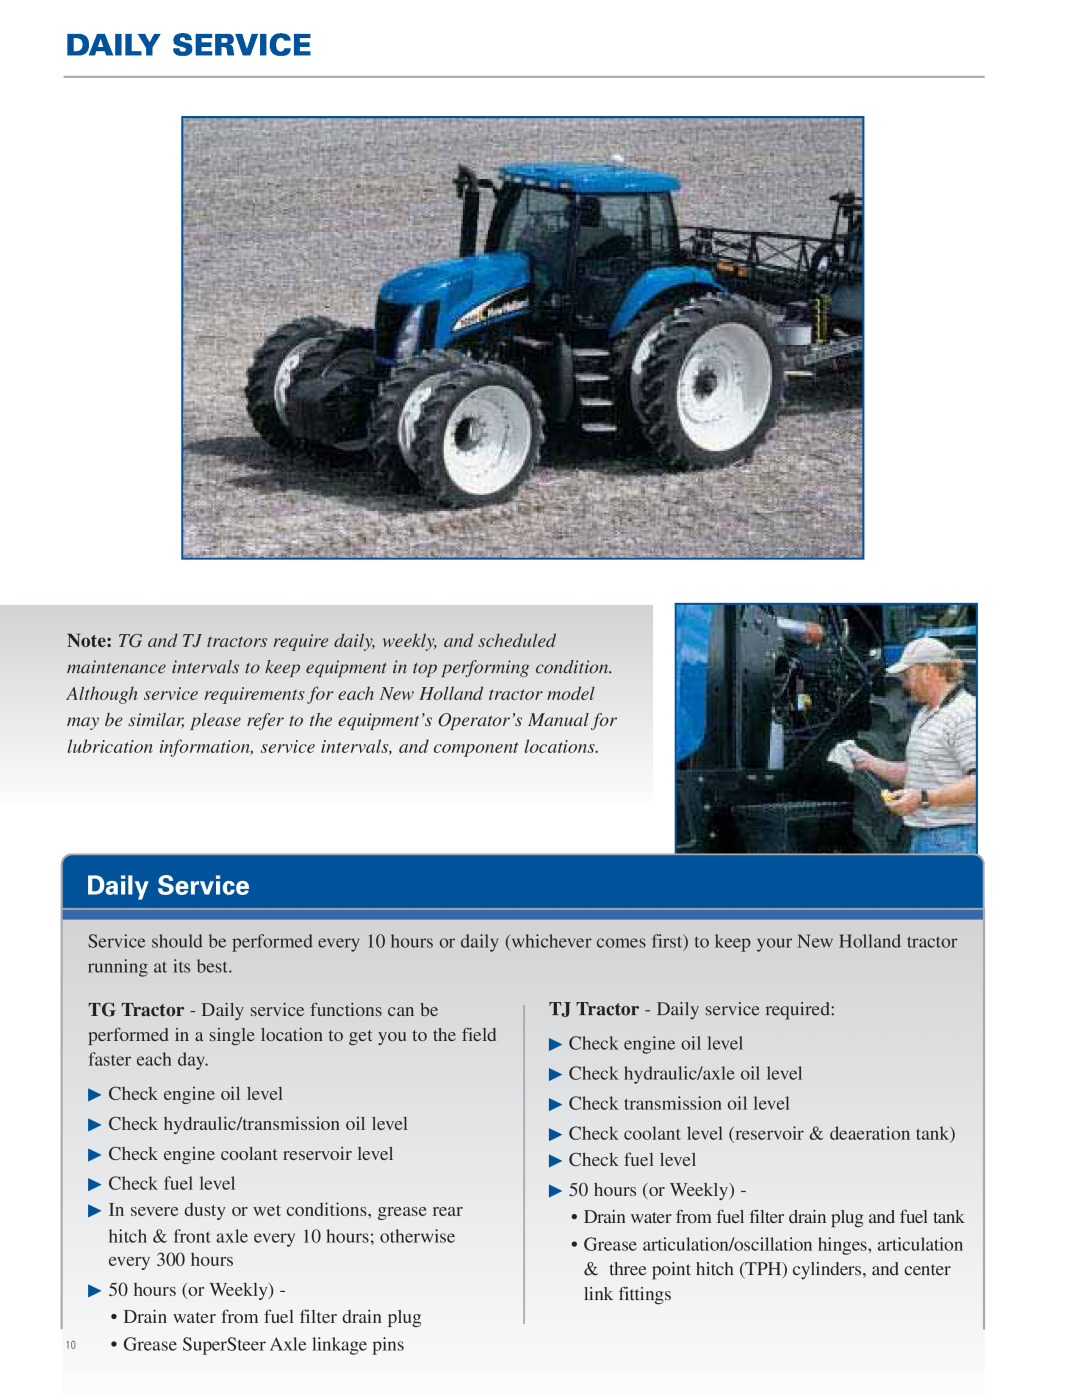 New Holland TJ Series, TG Series manual Daily Service 